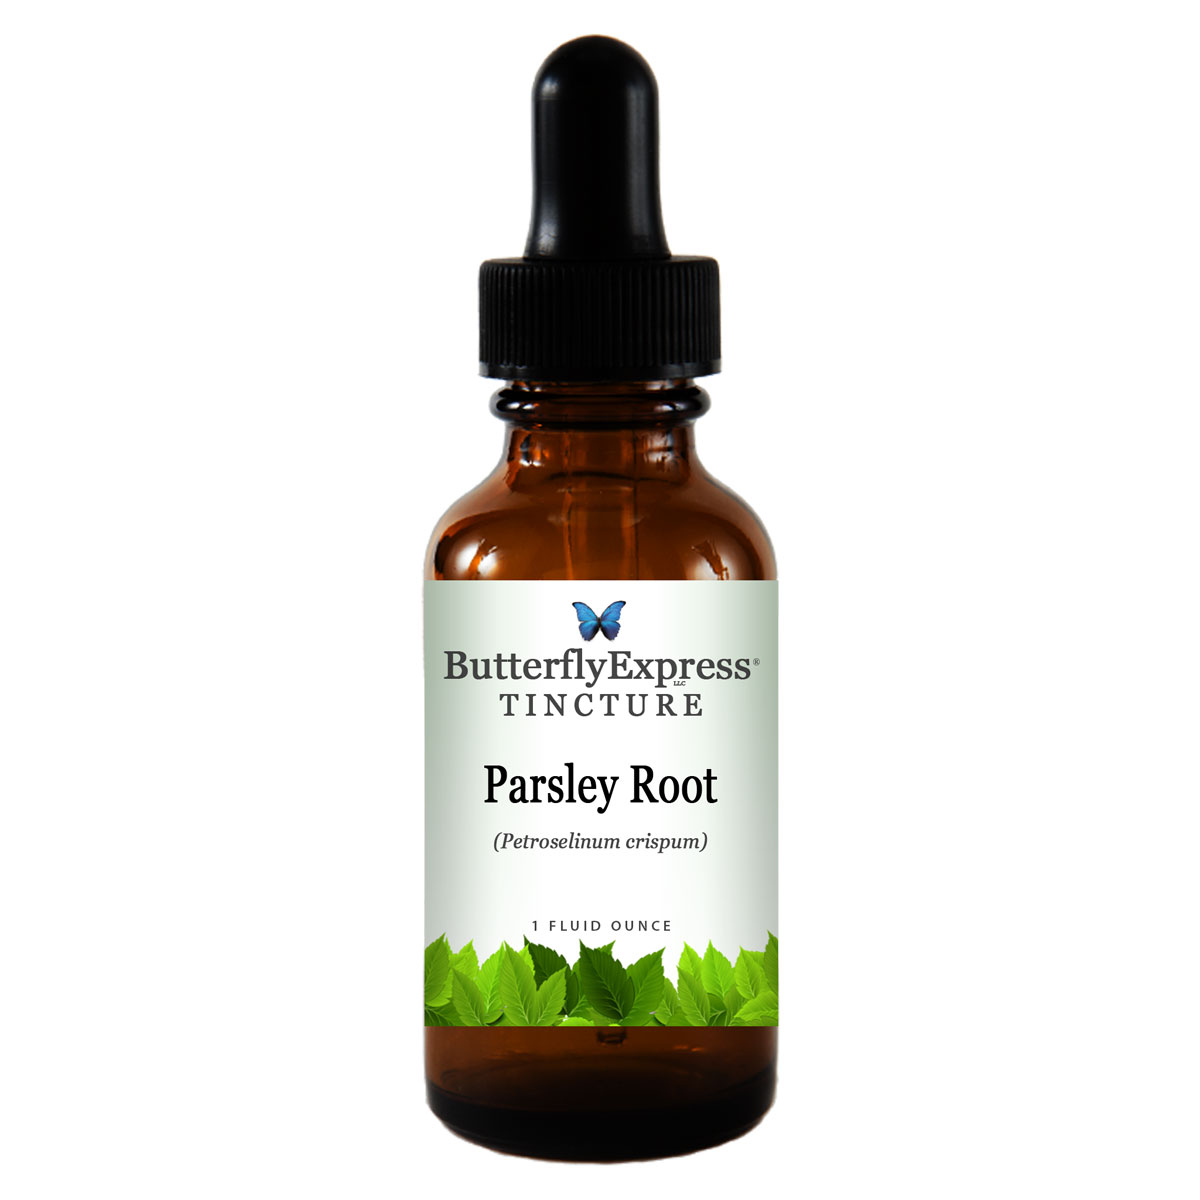 Parsley Root Tincture